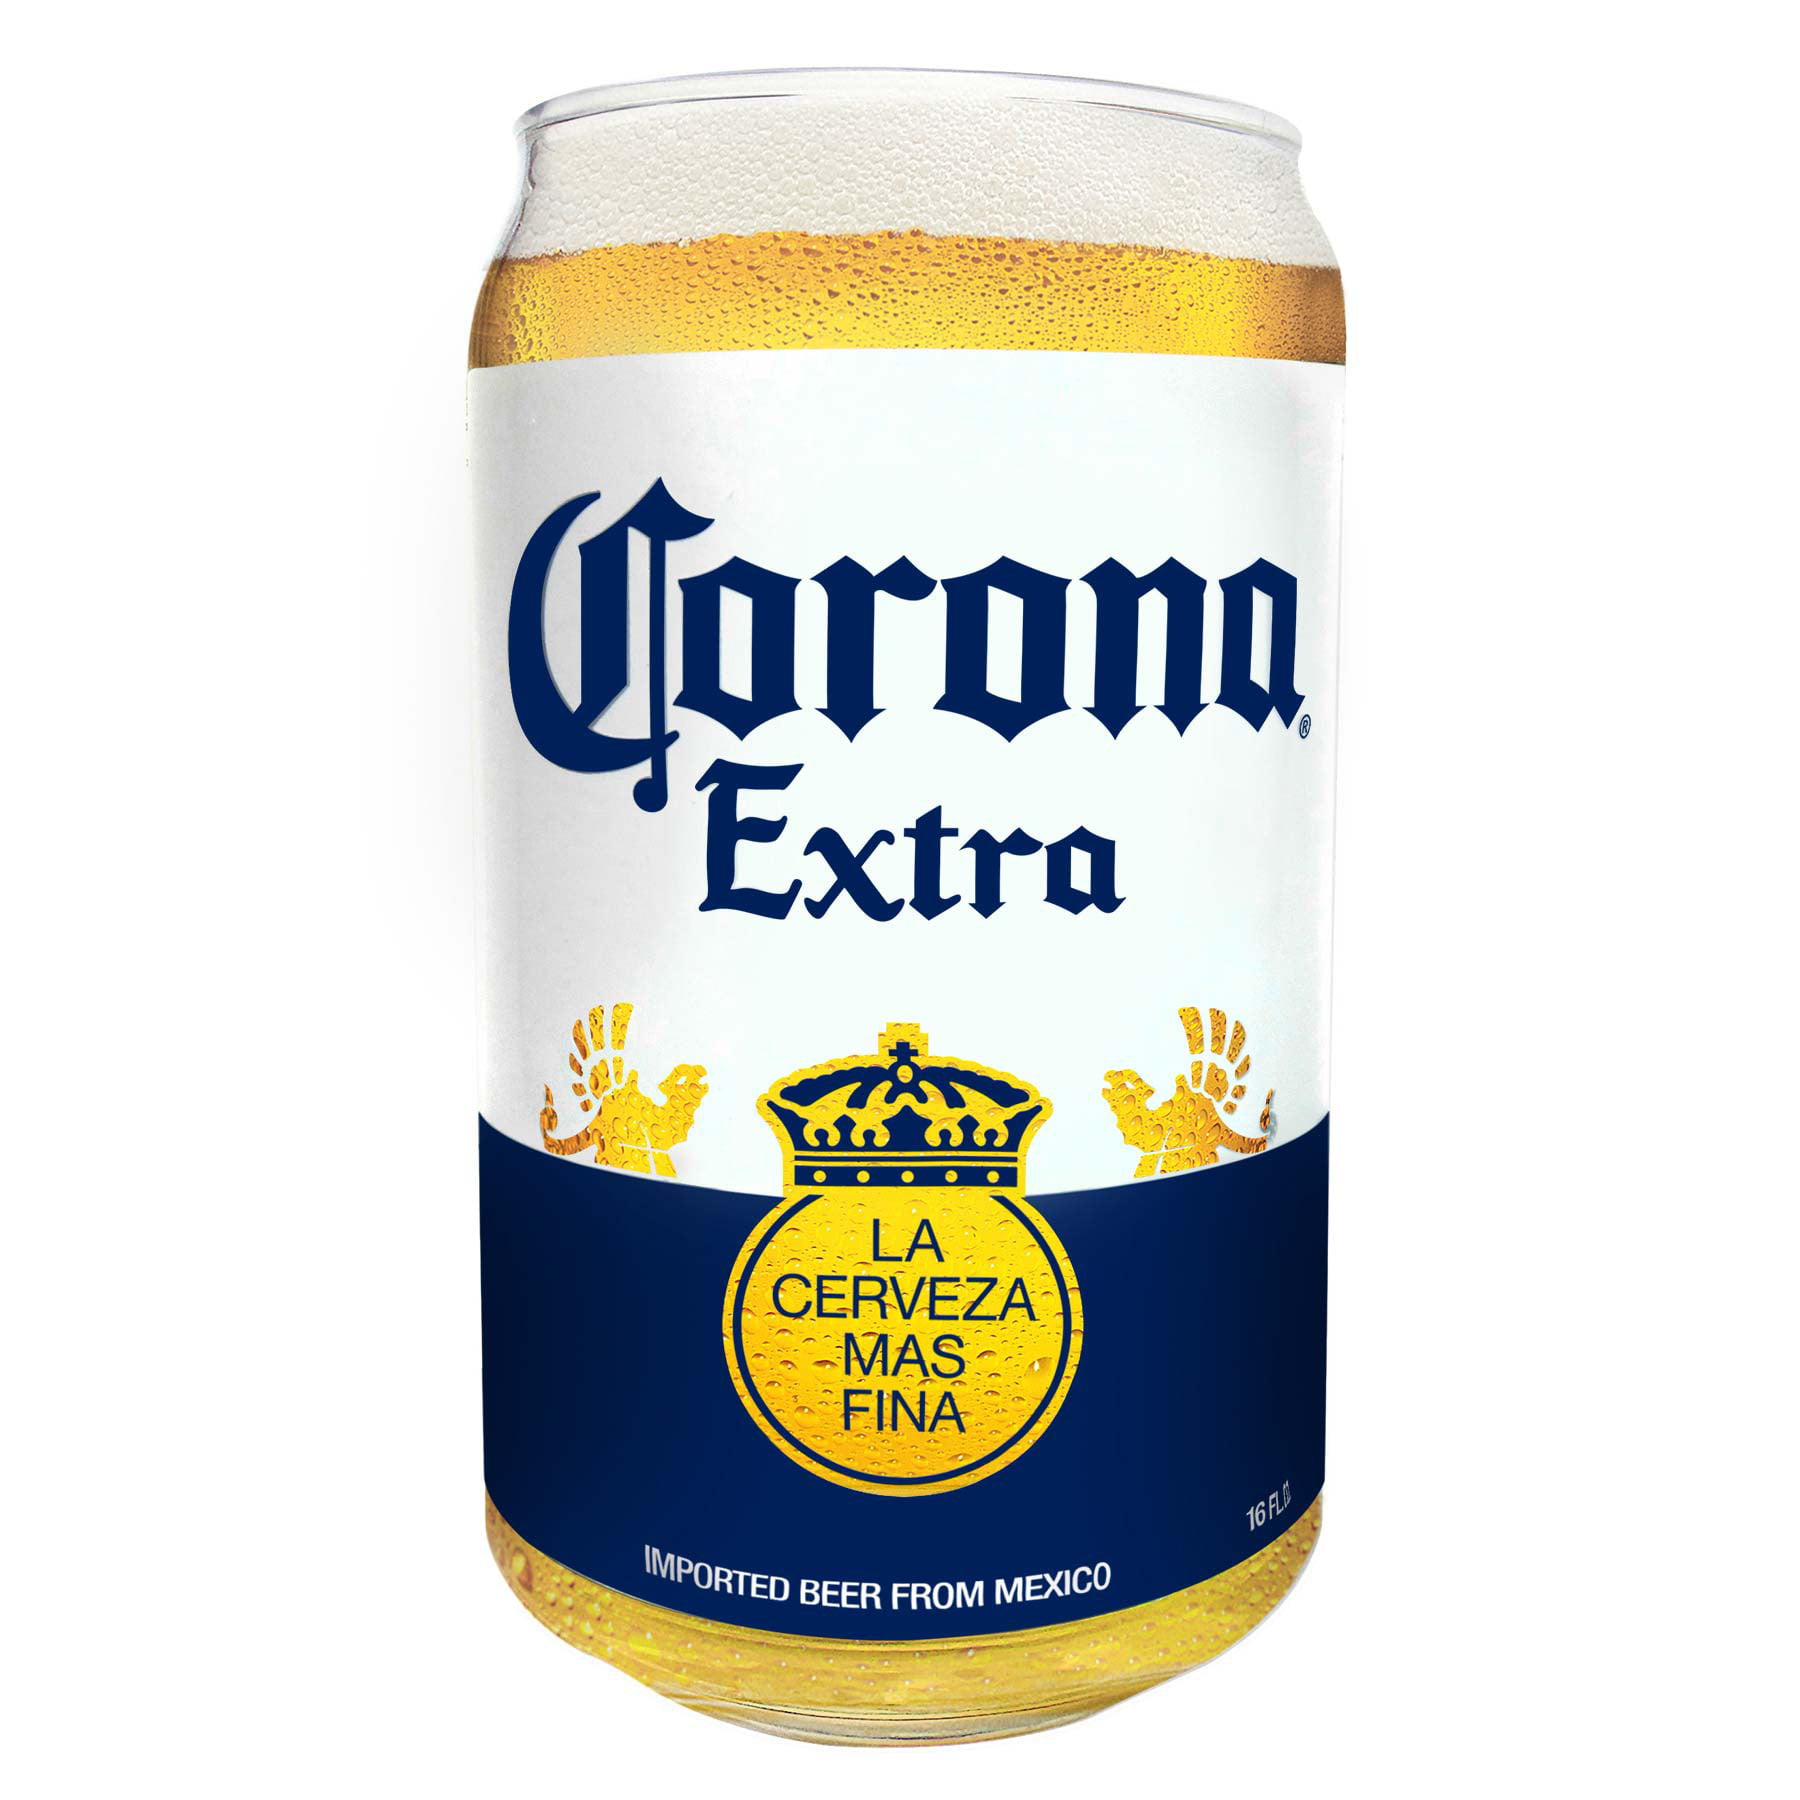 Corona Imported Mexico Beer Cerveza Glass Bottle Label Bar Pub Sign Wall Clock 